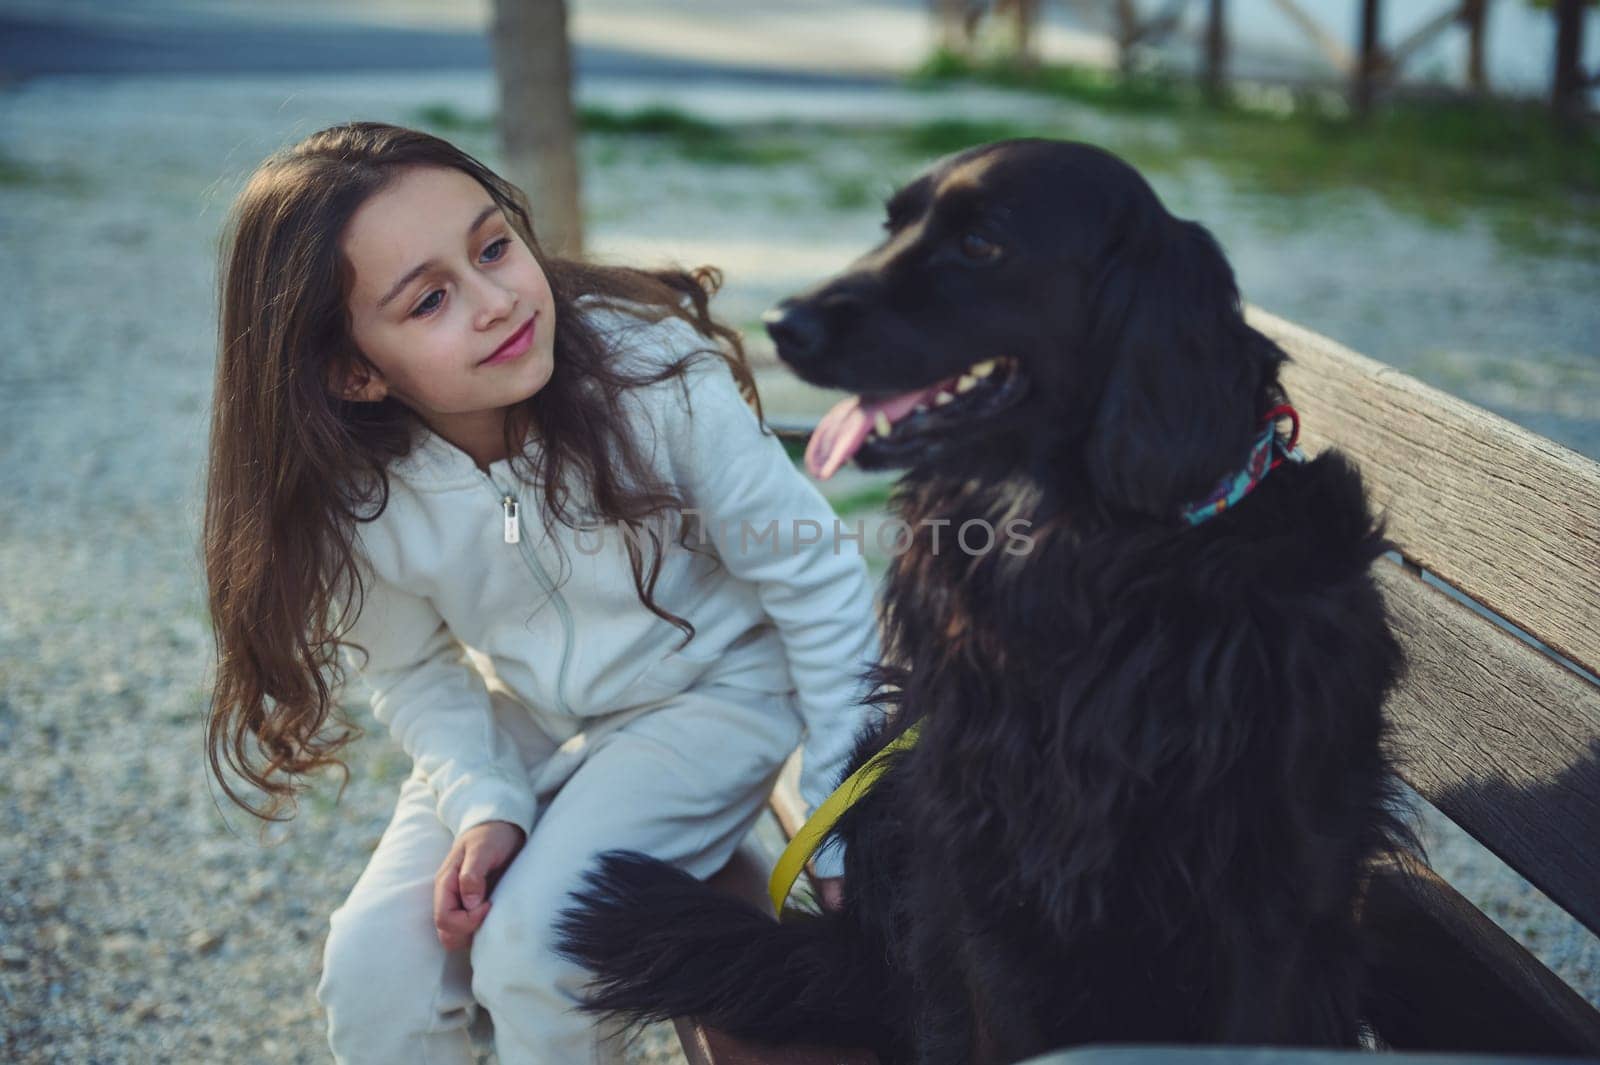 Beautiful little child girl talking to her best companion - a black young cocker spaniel dog, sitting together on the bench outdoors by artgf